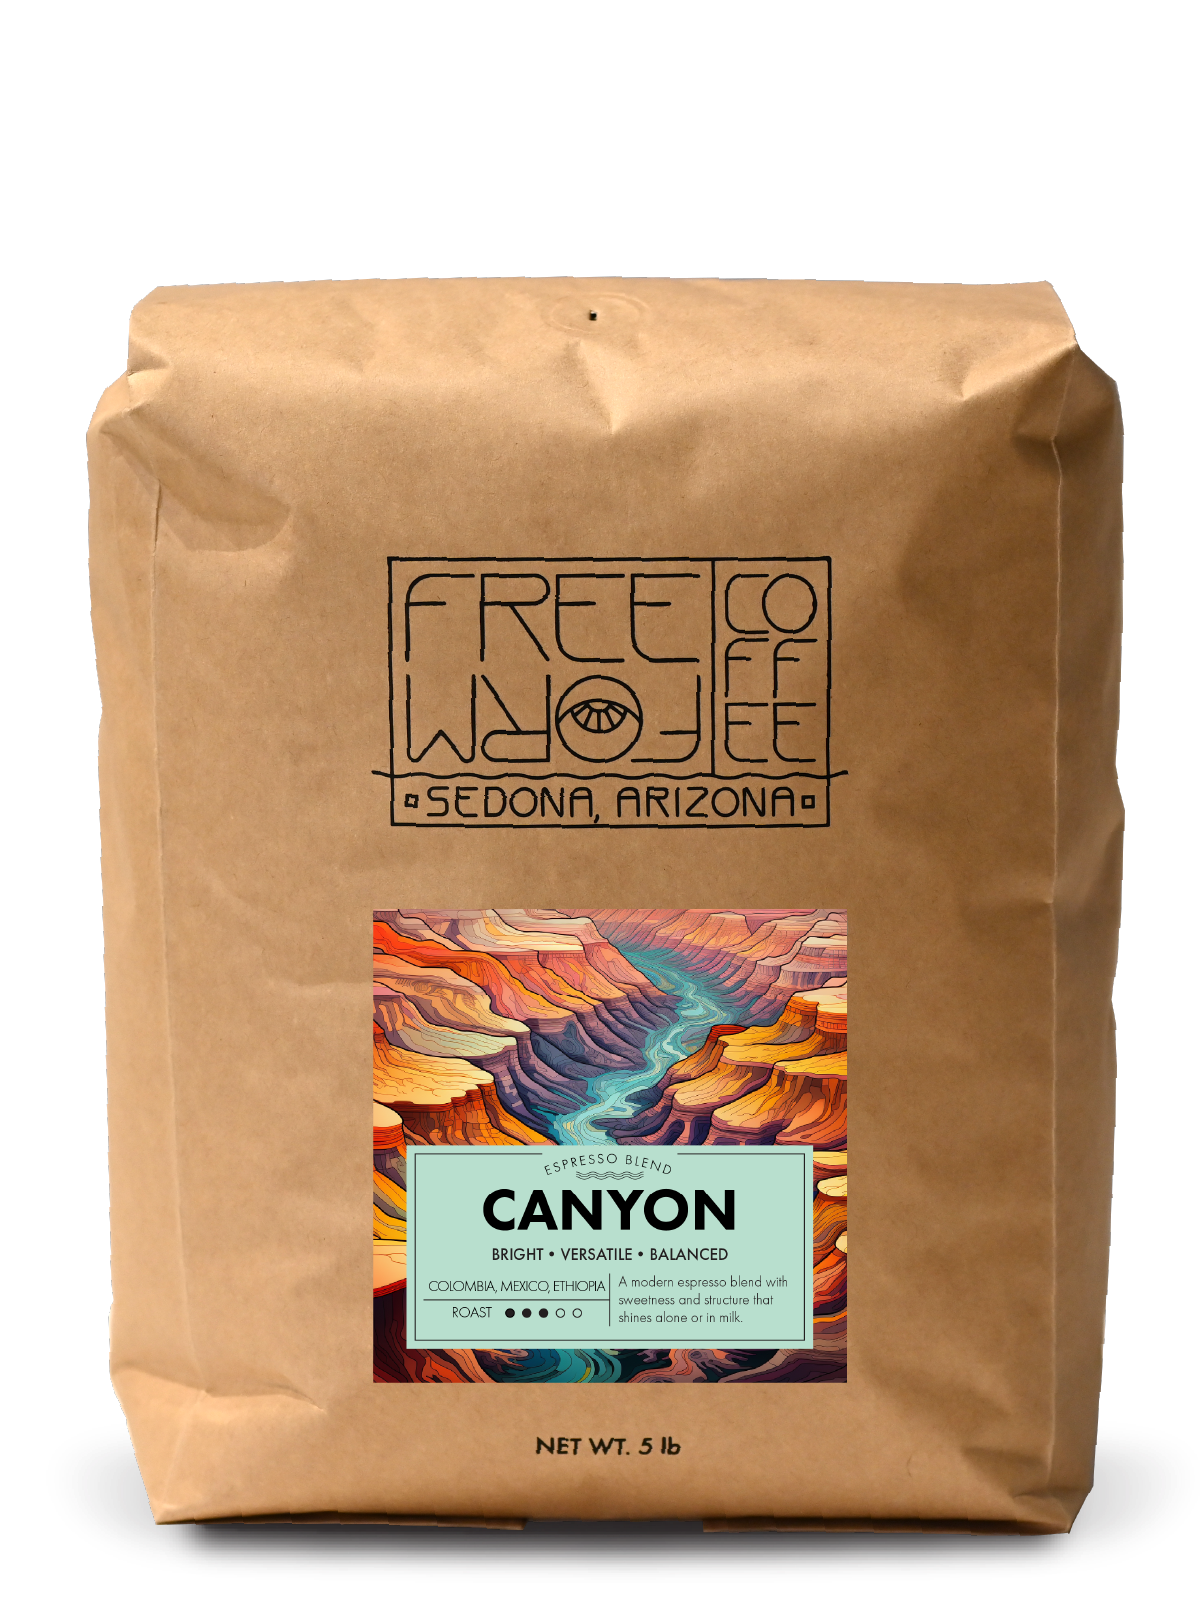 Canyon - Espresso Blend Gift Subscription